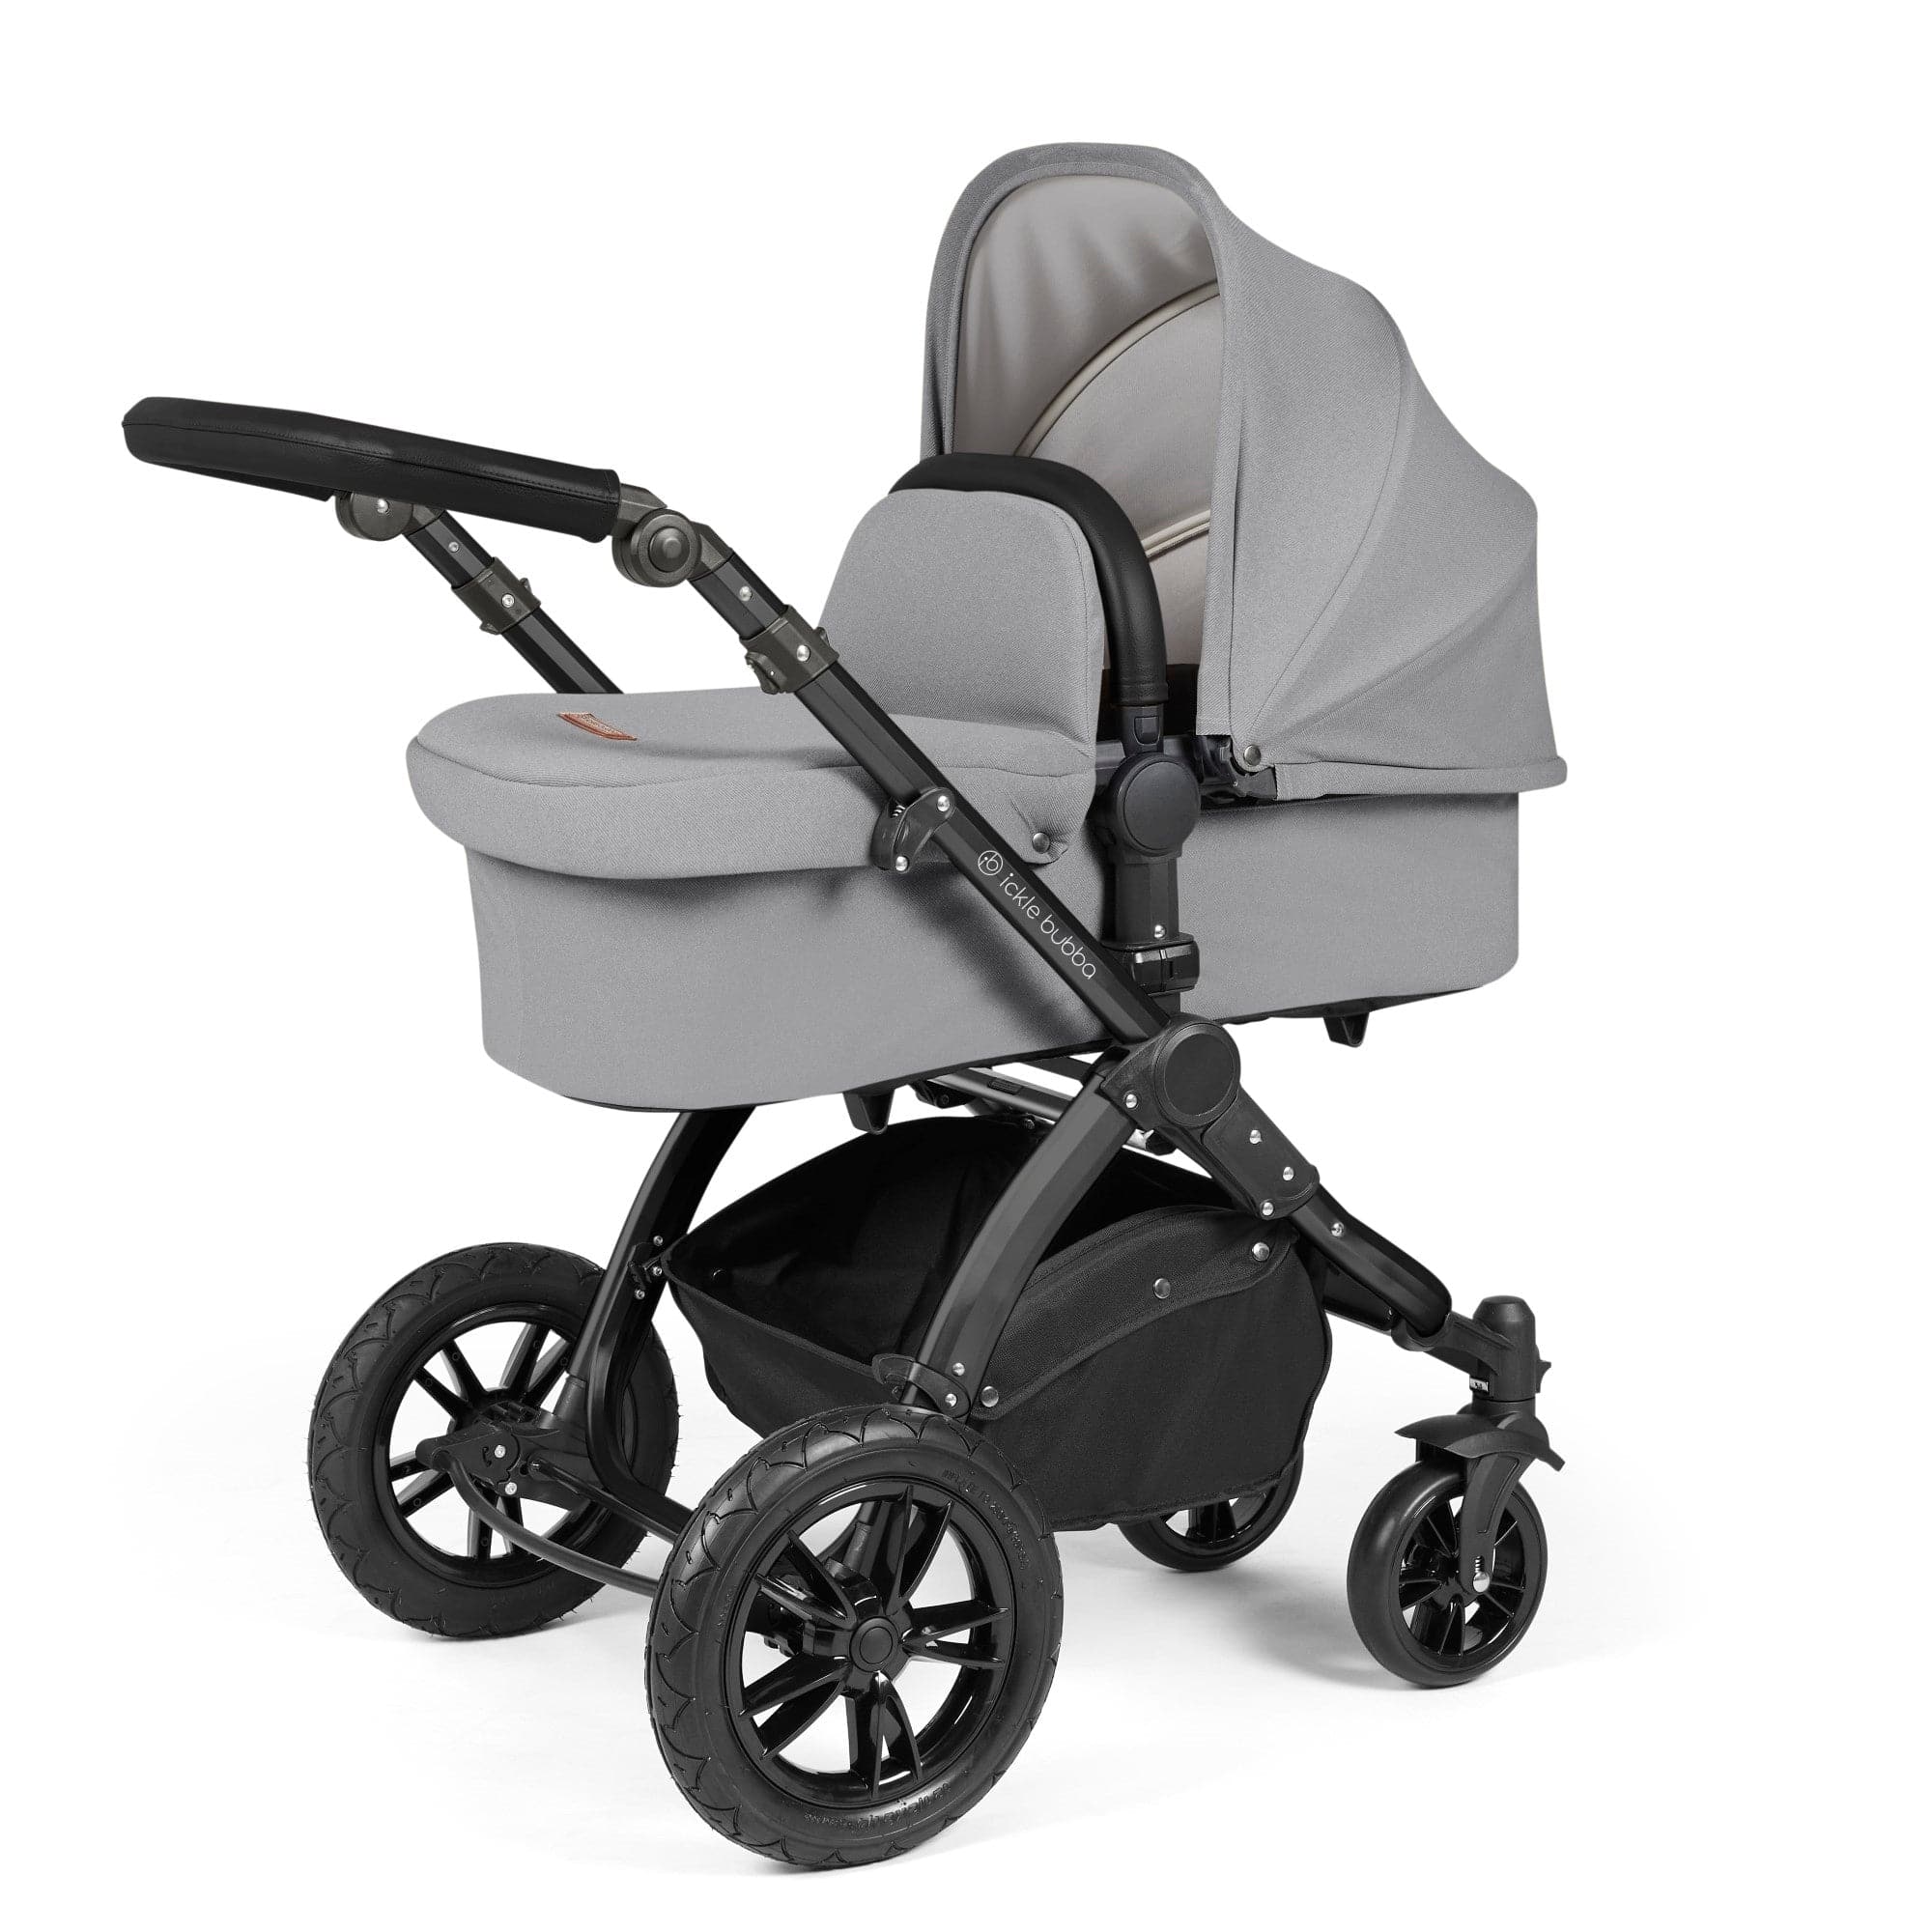 Ickle Bubba Stomp Luxe All-In-One I-Size Travel System With Isofix Base- Black / Pearl Grey / Black   